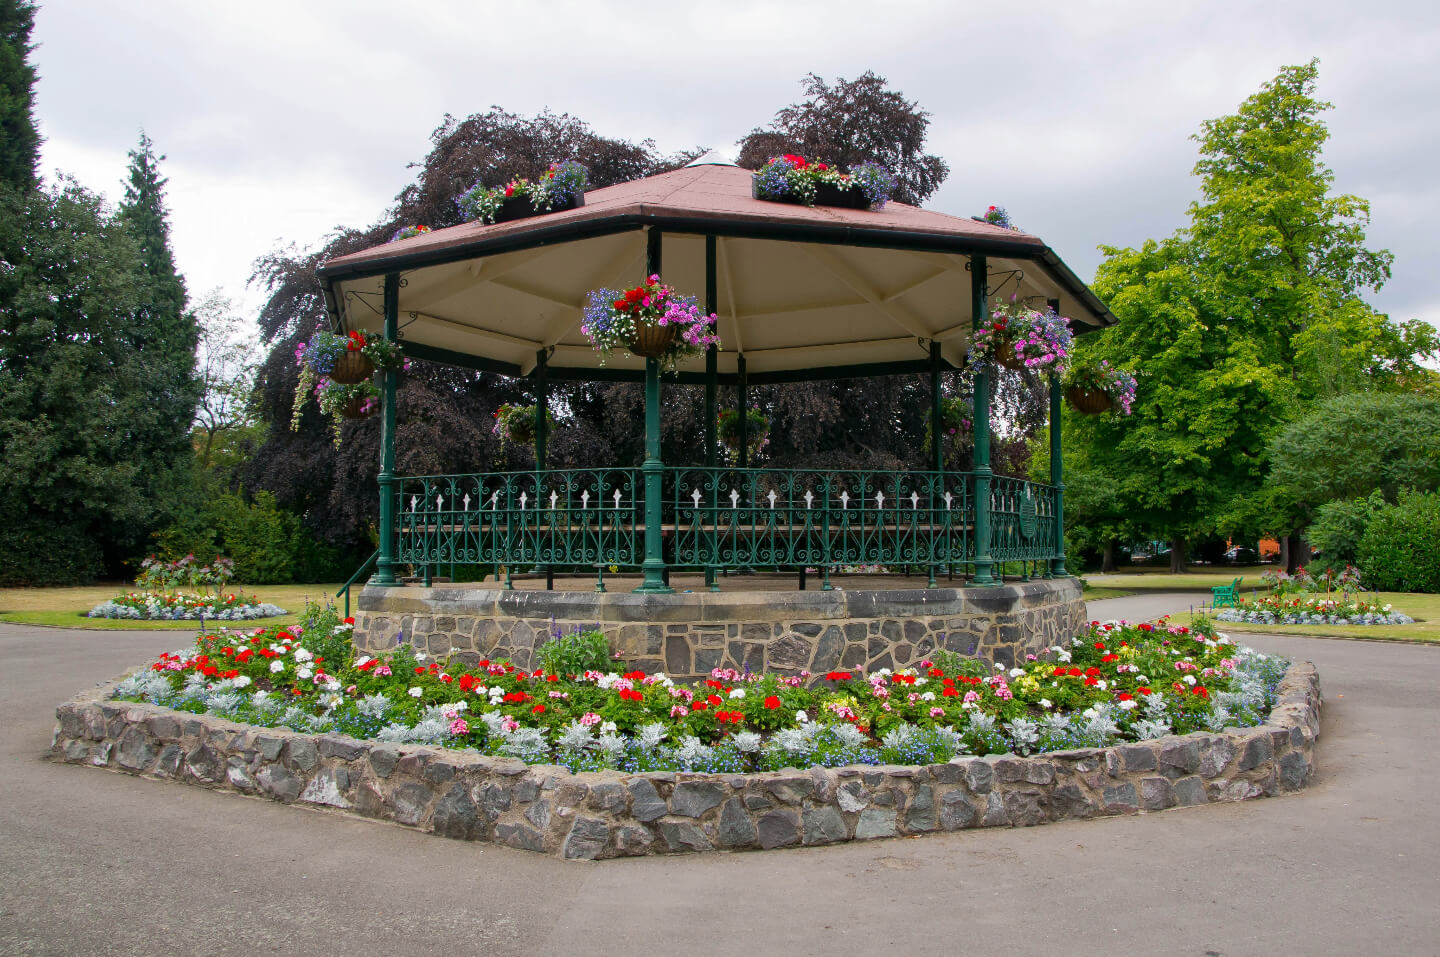 Student Accommodation in Loughborough Town Centre, Loughborough - Bandstand and flowers in Queen's Park